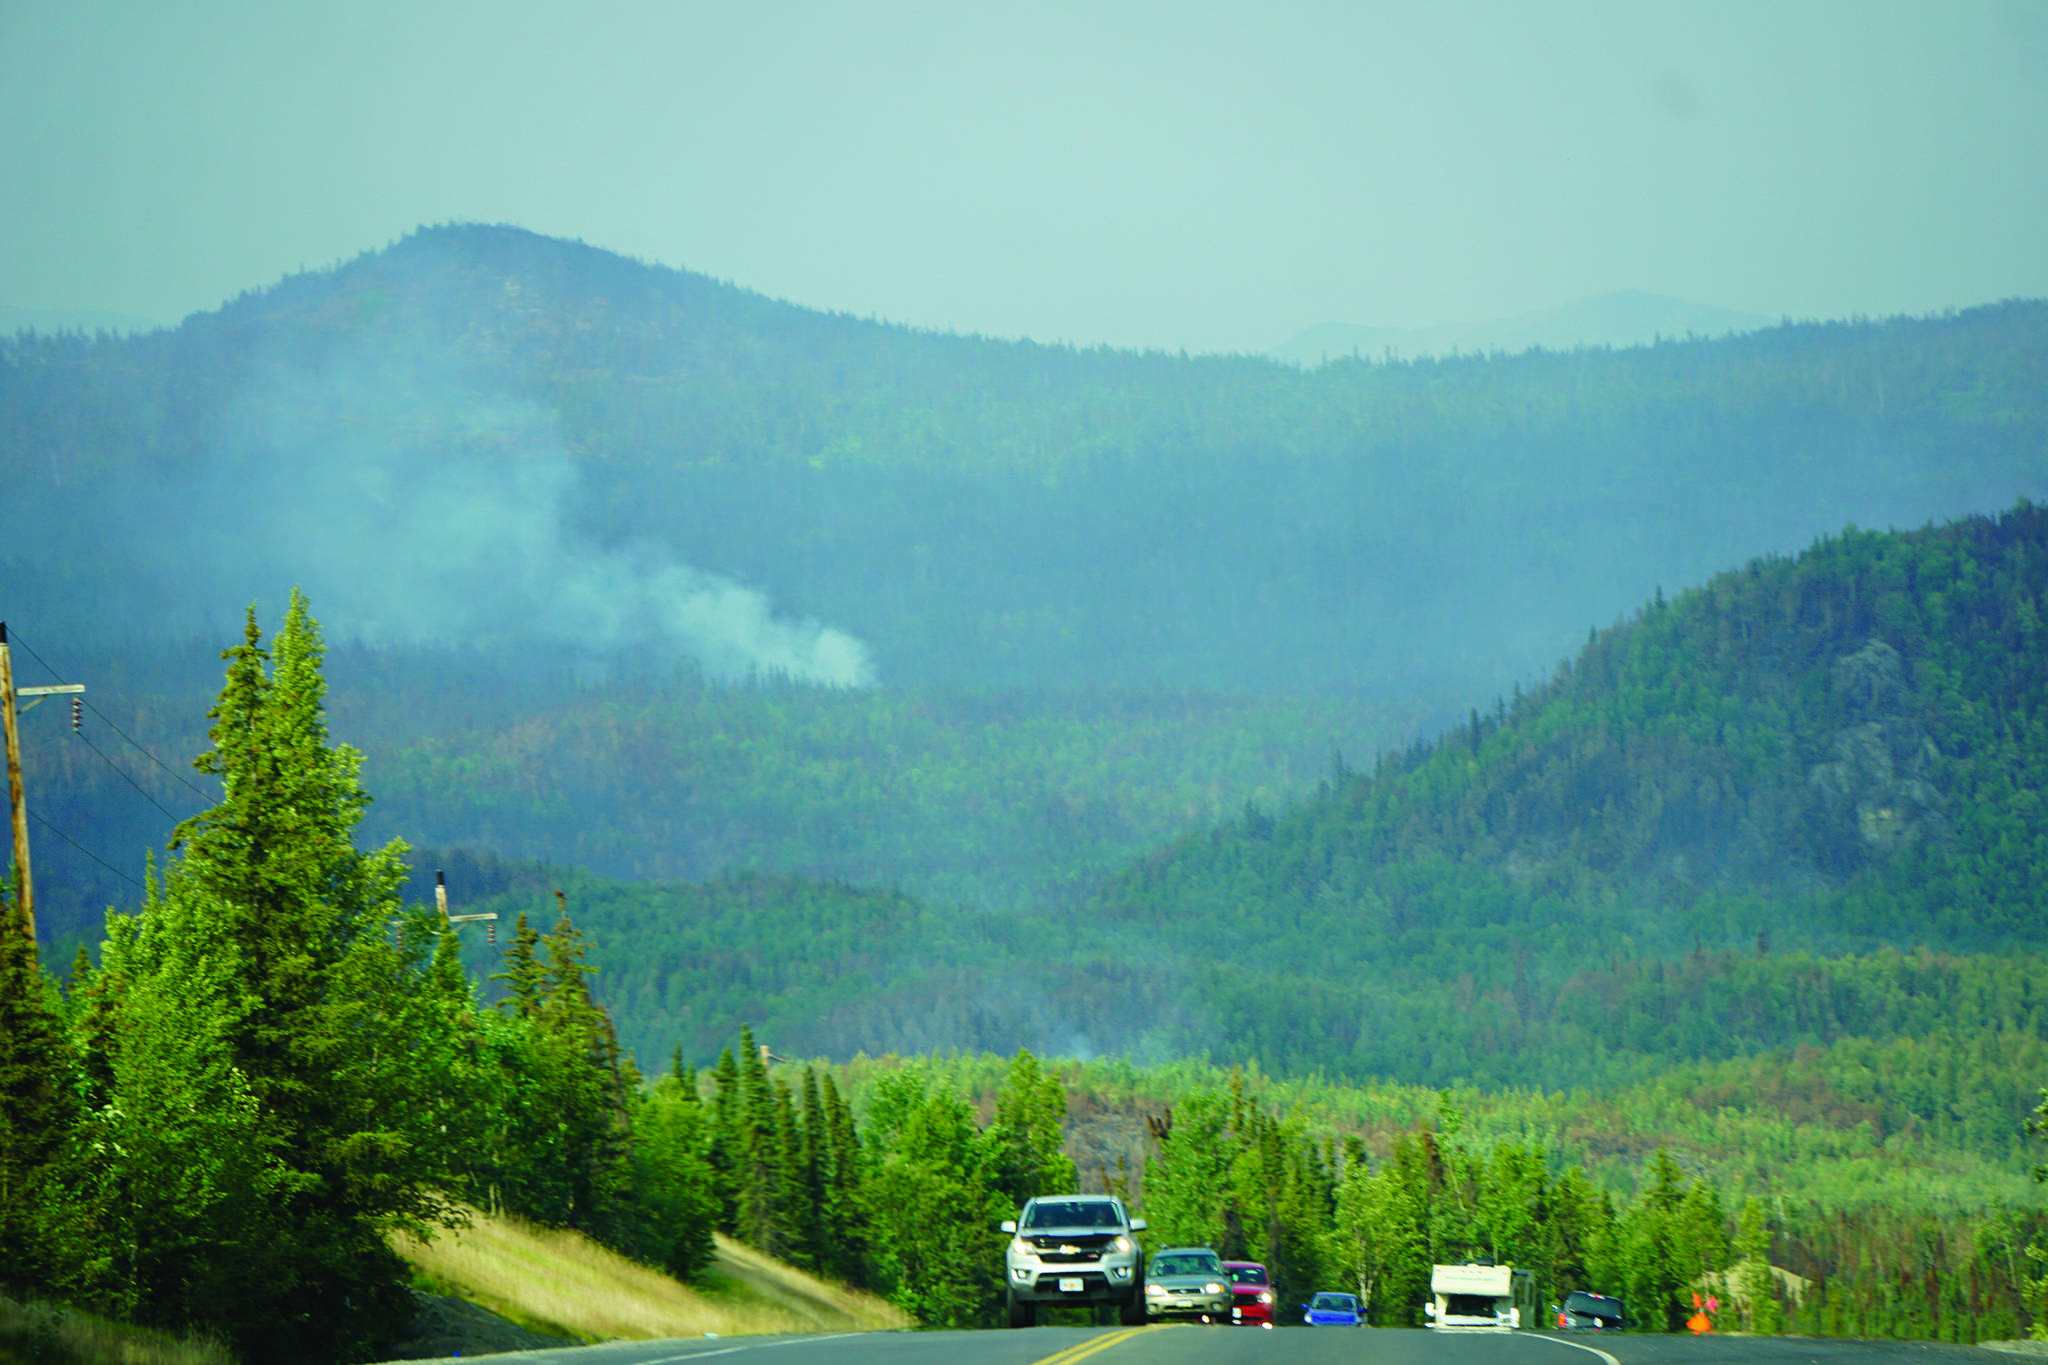 A plume of smoke rises from the Swan Lake fire area as vehicles head south on the Sterling Highway on July 18, 2019, near Skilak Lake, Alaska. (Photo by Michael Armstrong/Homer News)